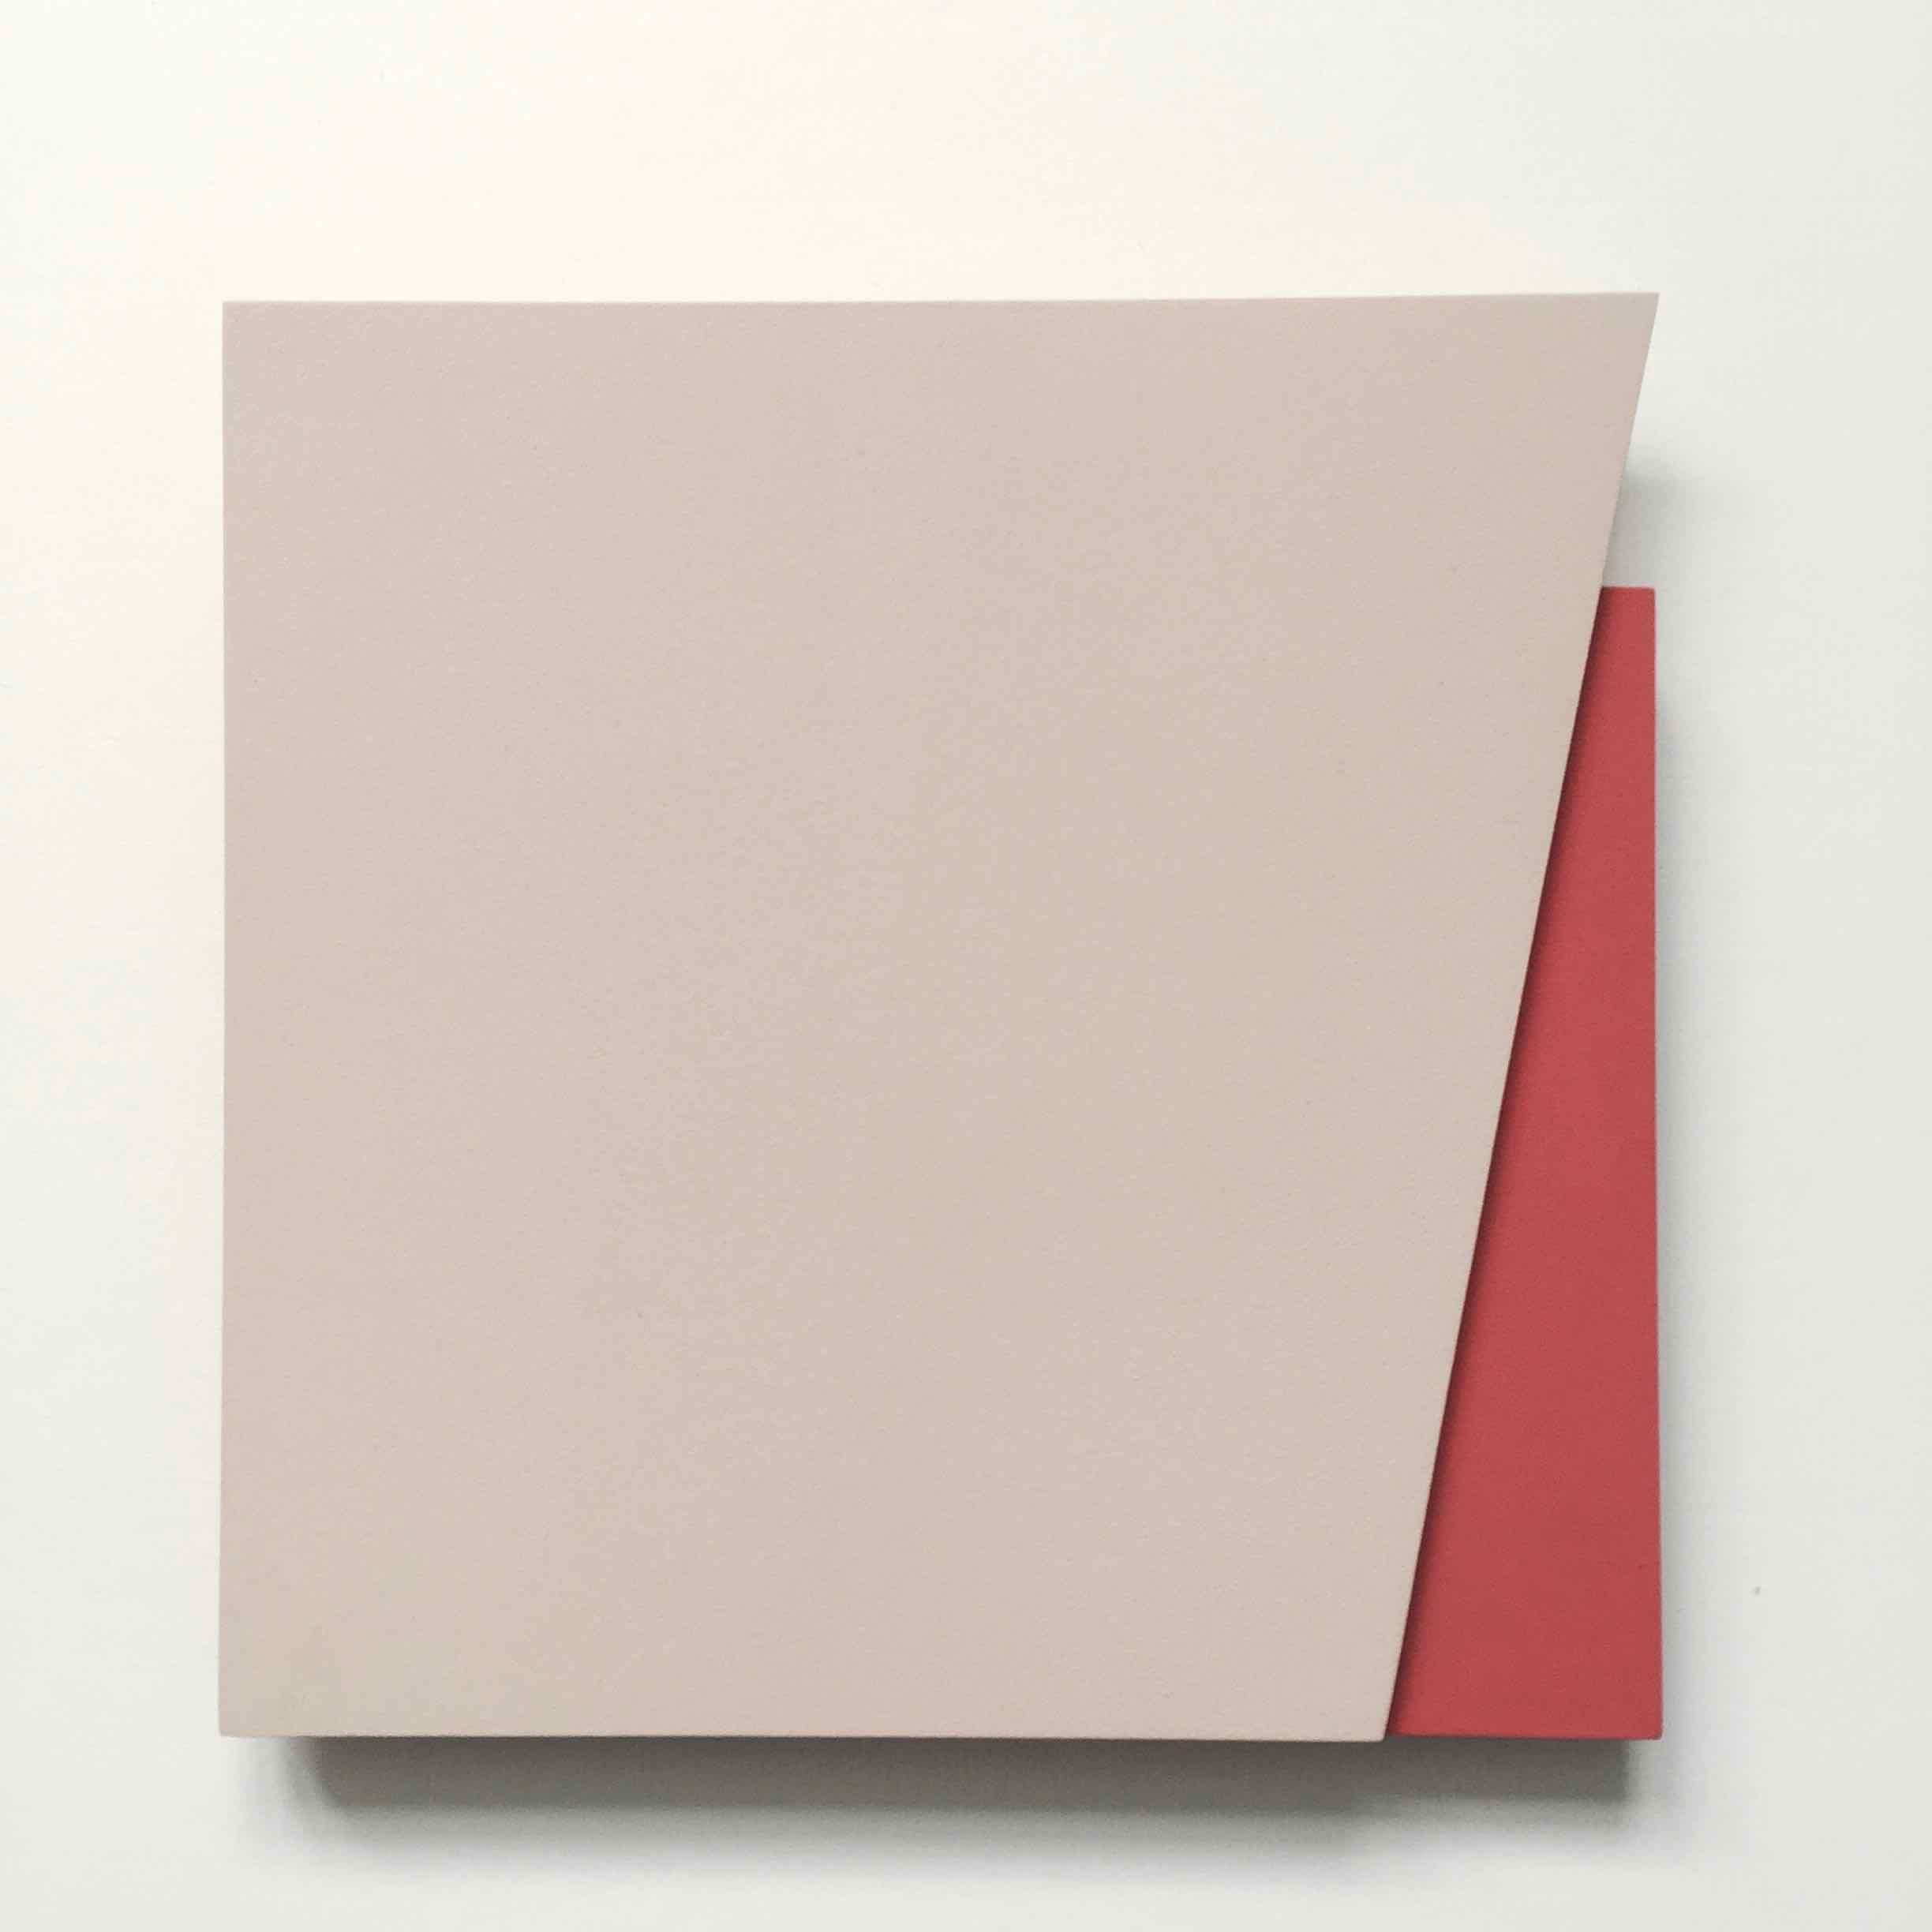 'Cut-out 20': Set of Four Minimal Hard Edge Abstract Paintings - Sculpture by Laura Jane Scott